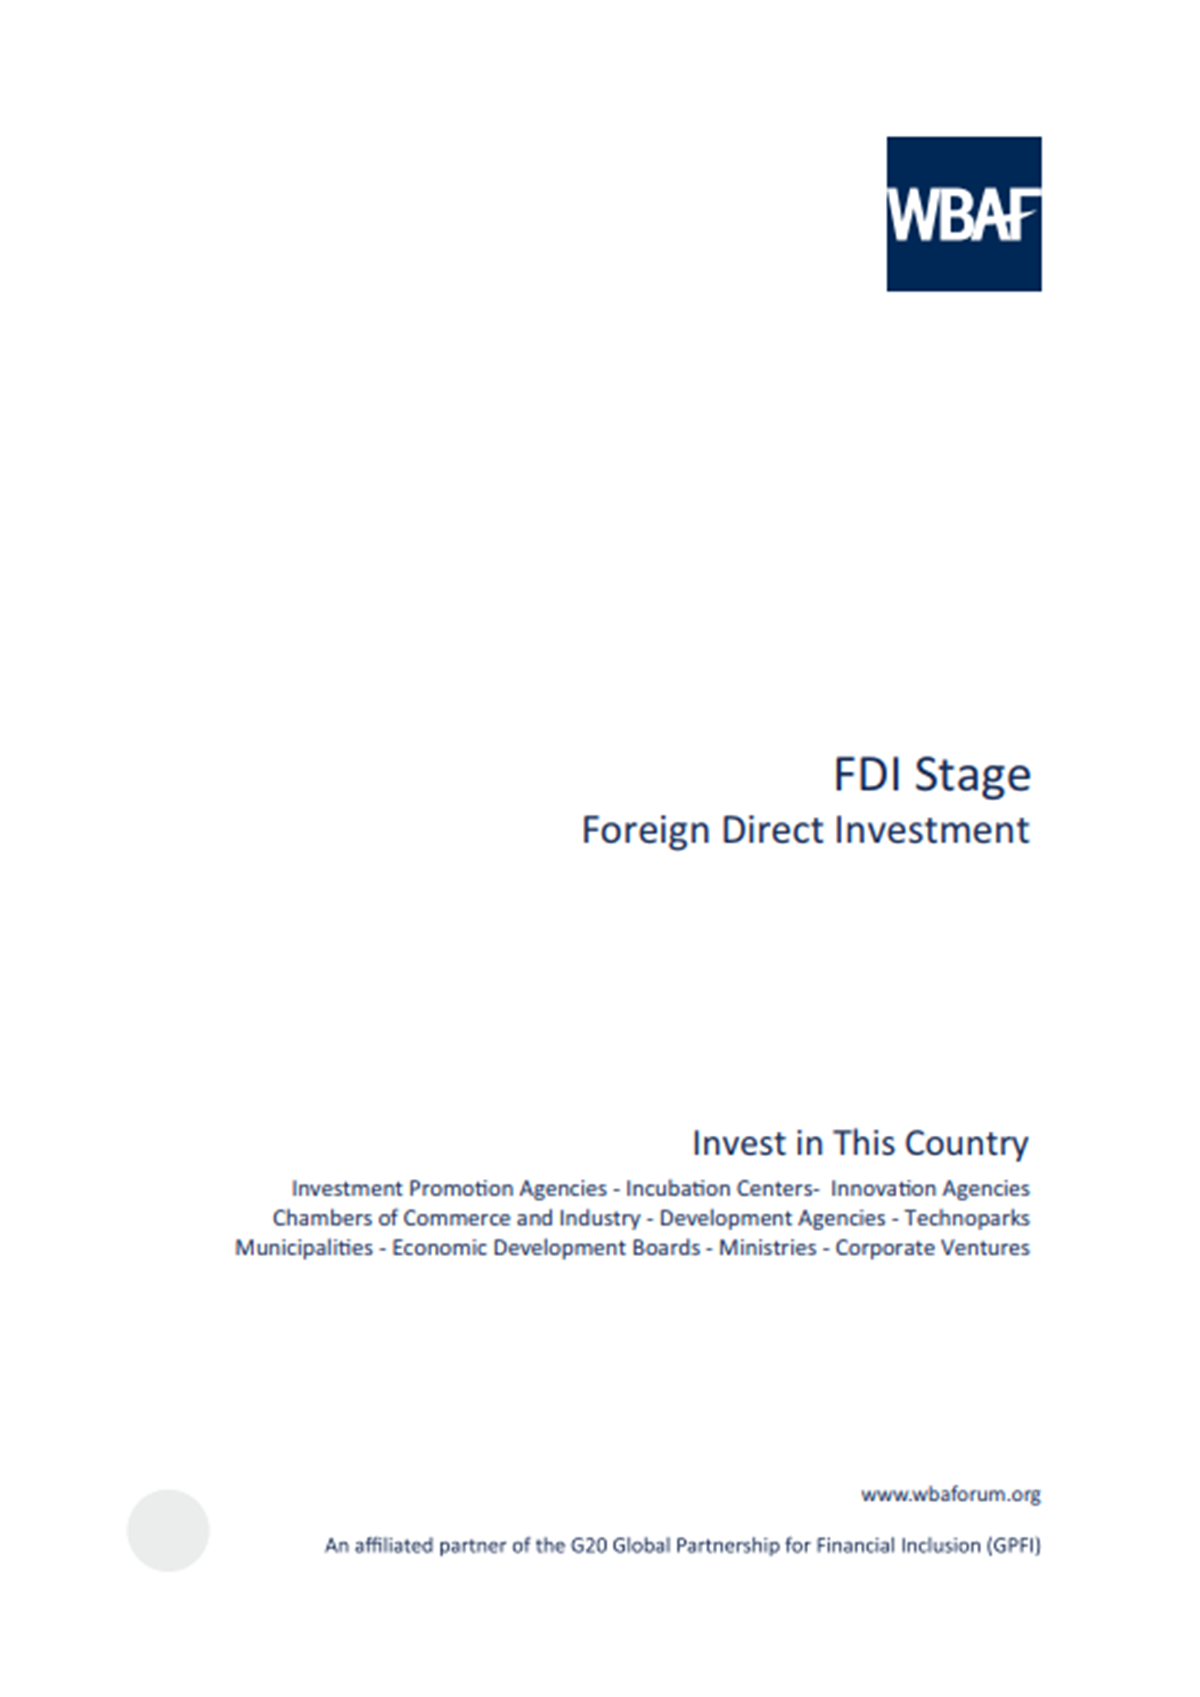 FDI Stage - Foreign Direct Investment